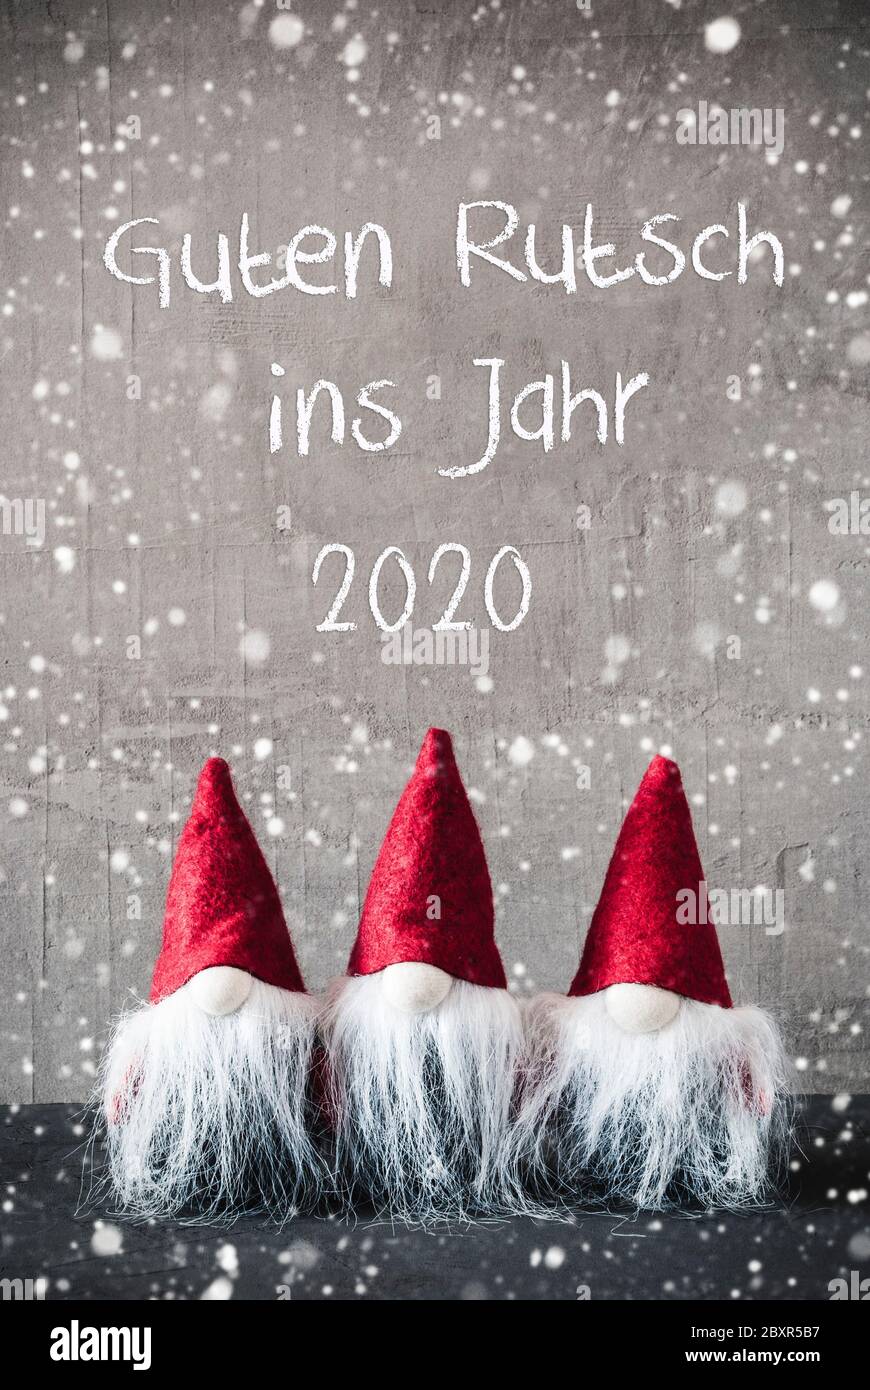 Three Gray Gnomes With English Text Guten Rutsch Ins Jahr 2020 Means Happy New Year And Red Jelly Bag Cap. Urban Cement Background With Snowflakes. Ve Stock Photo